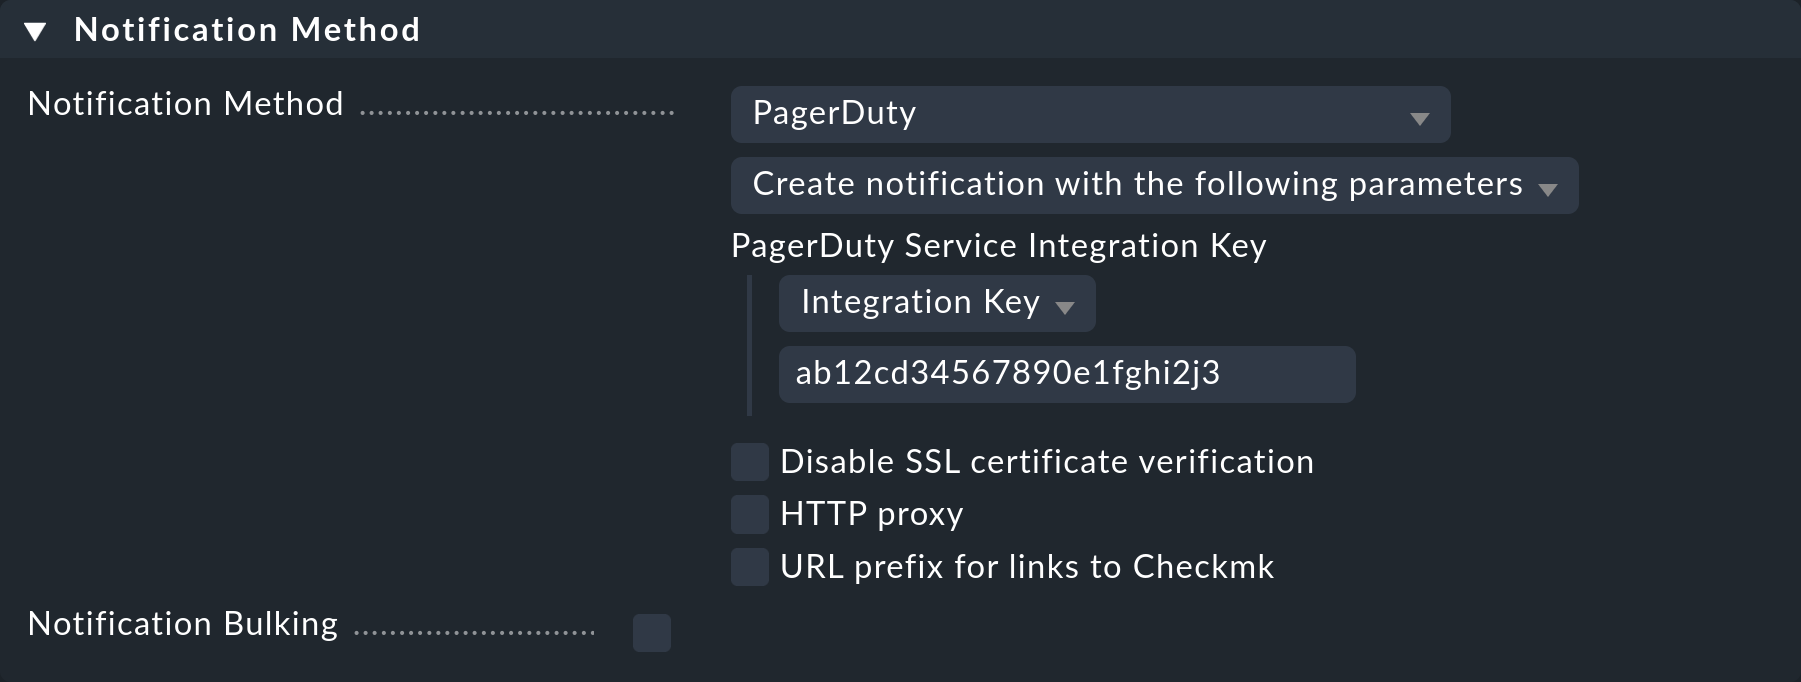 The notification method settings for PagerDuty.